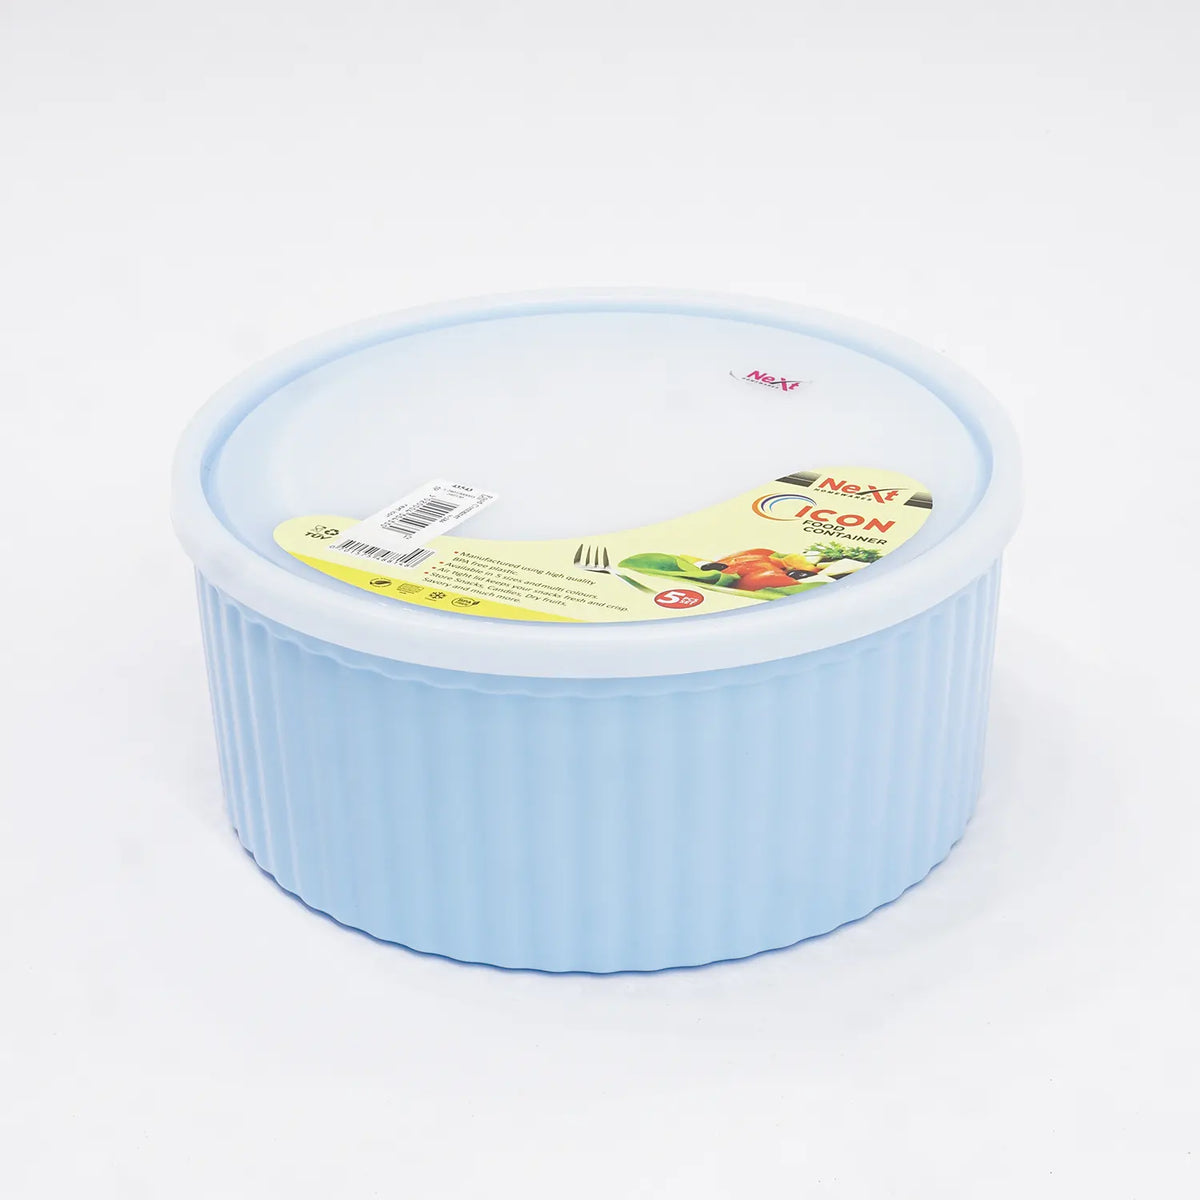 Versatile Set of 5 Food Containers: Organize Your Kitchen with Ease